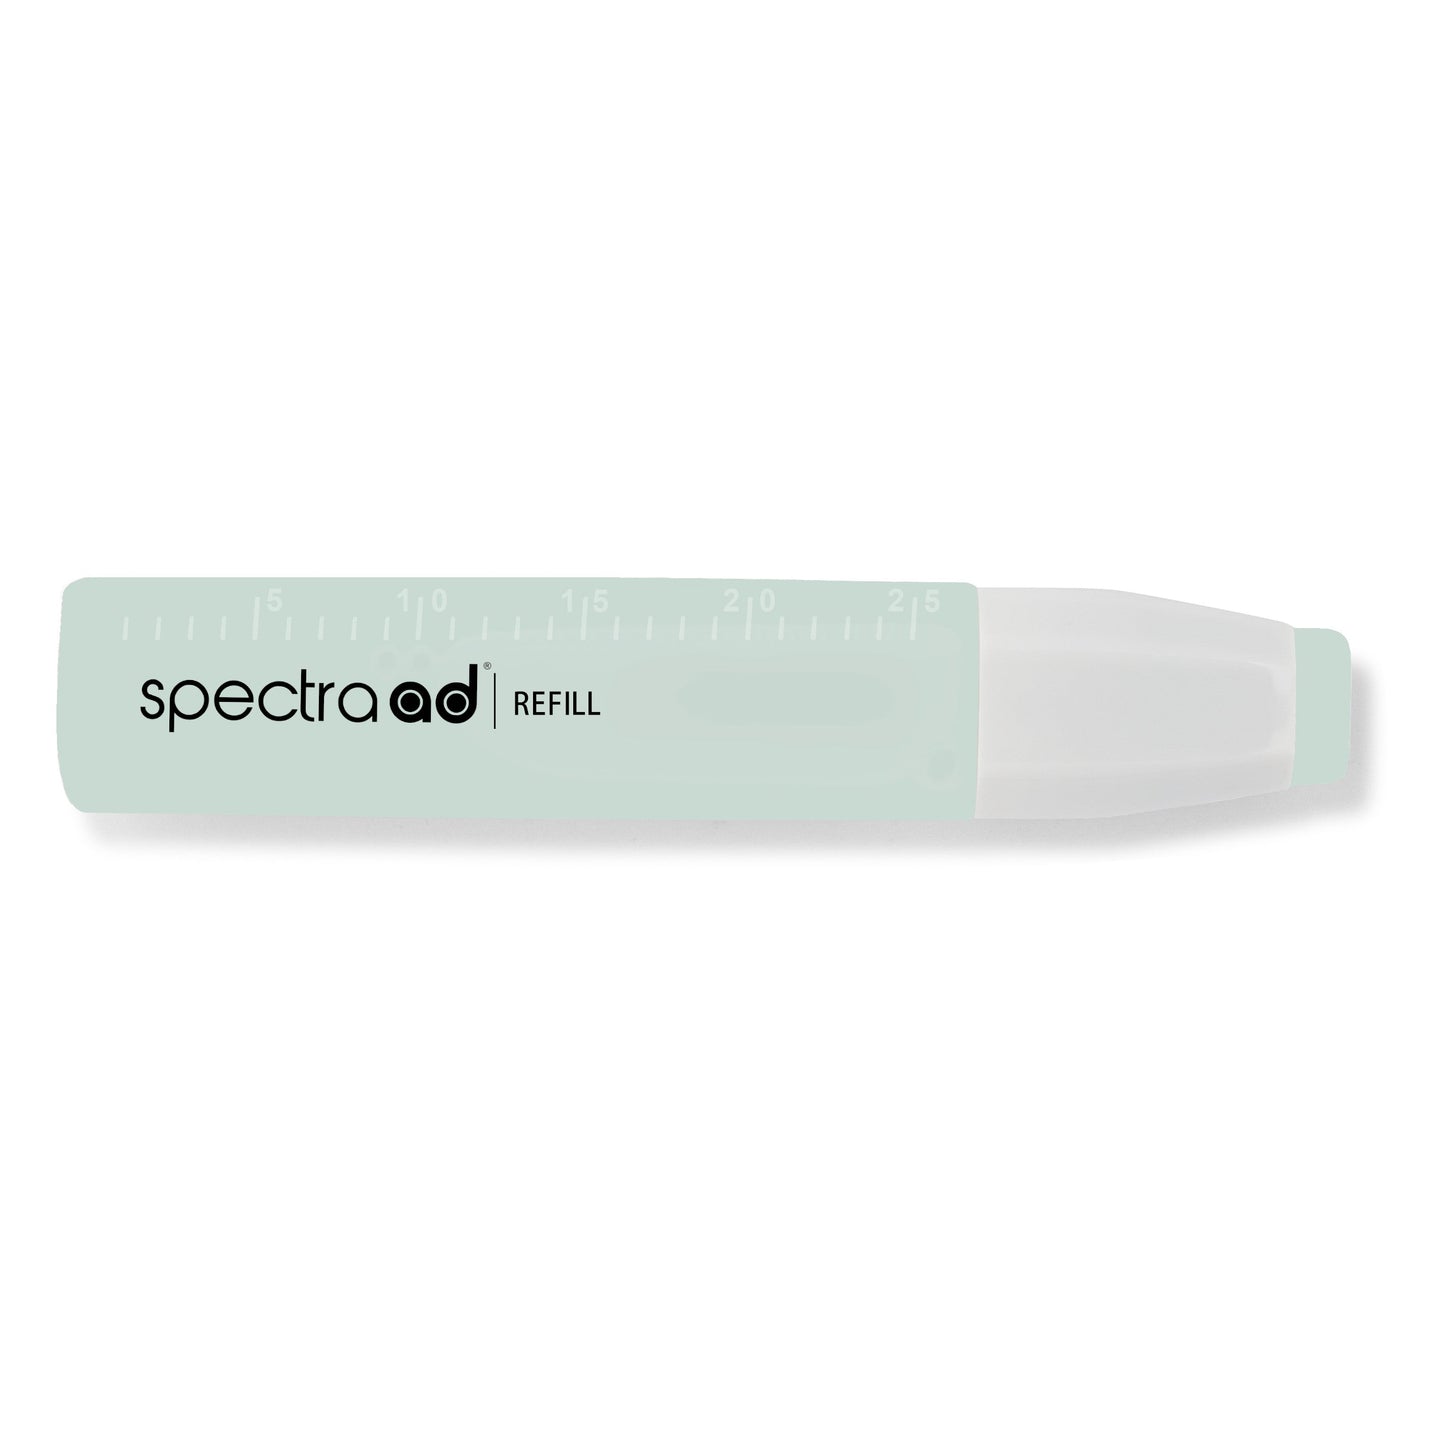 088 - Sage - Spectra AD Refill Bottle